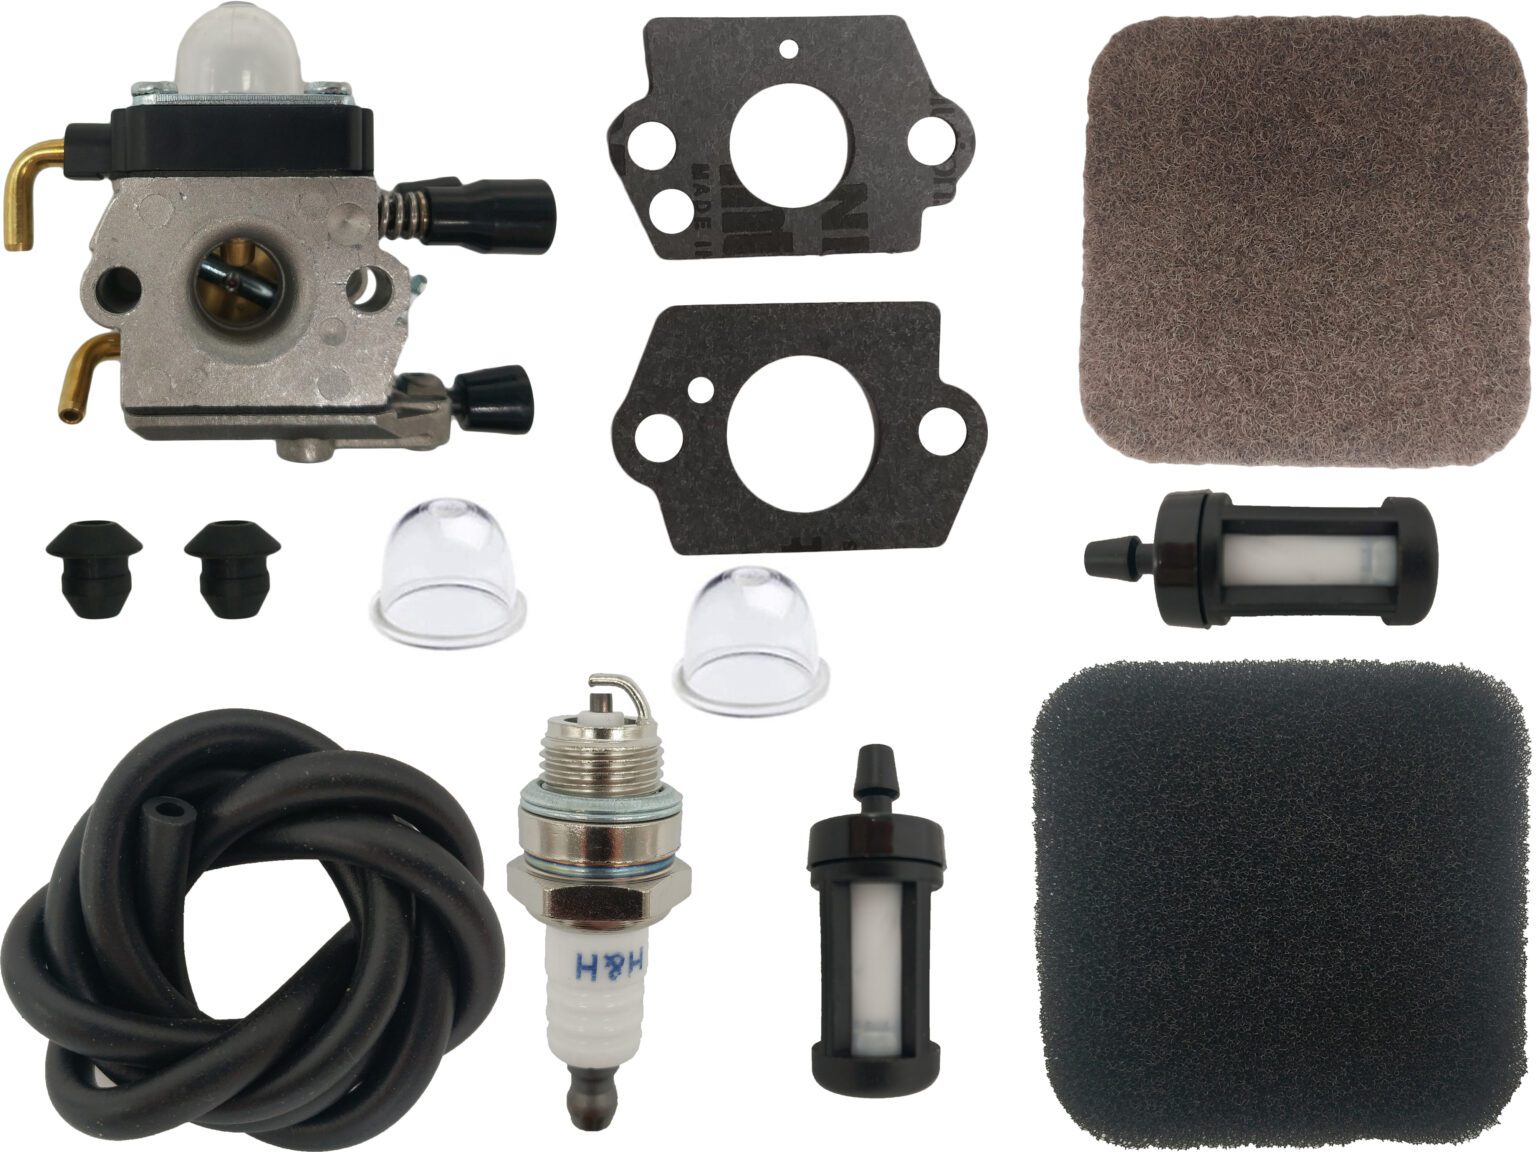 Carburetor with Air Filter Fuel Lines RePower Kit for STIHL FC 72 Edger